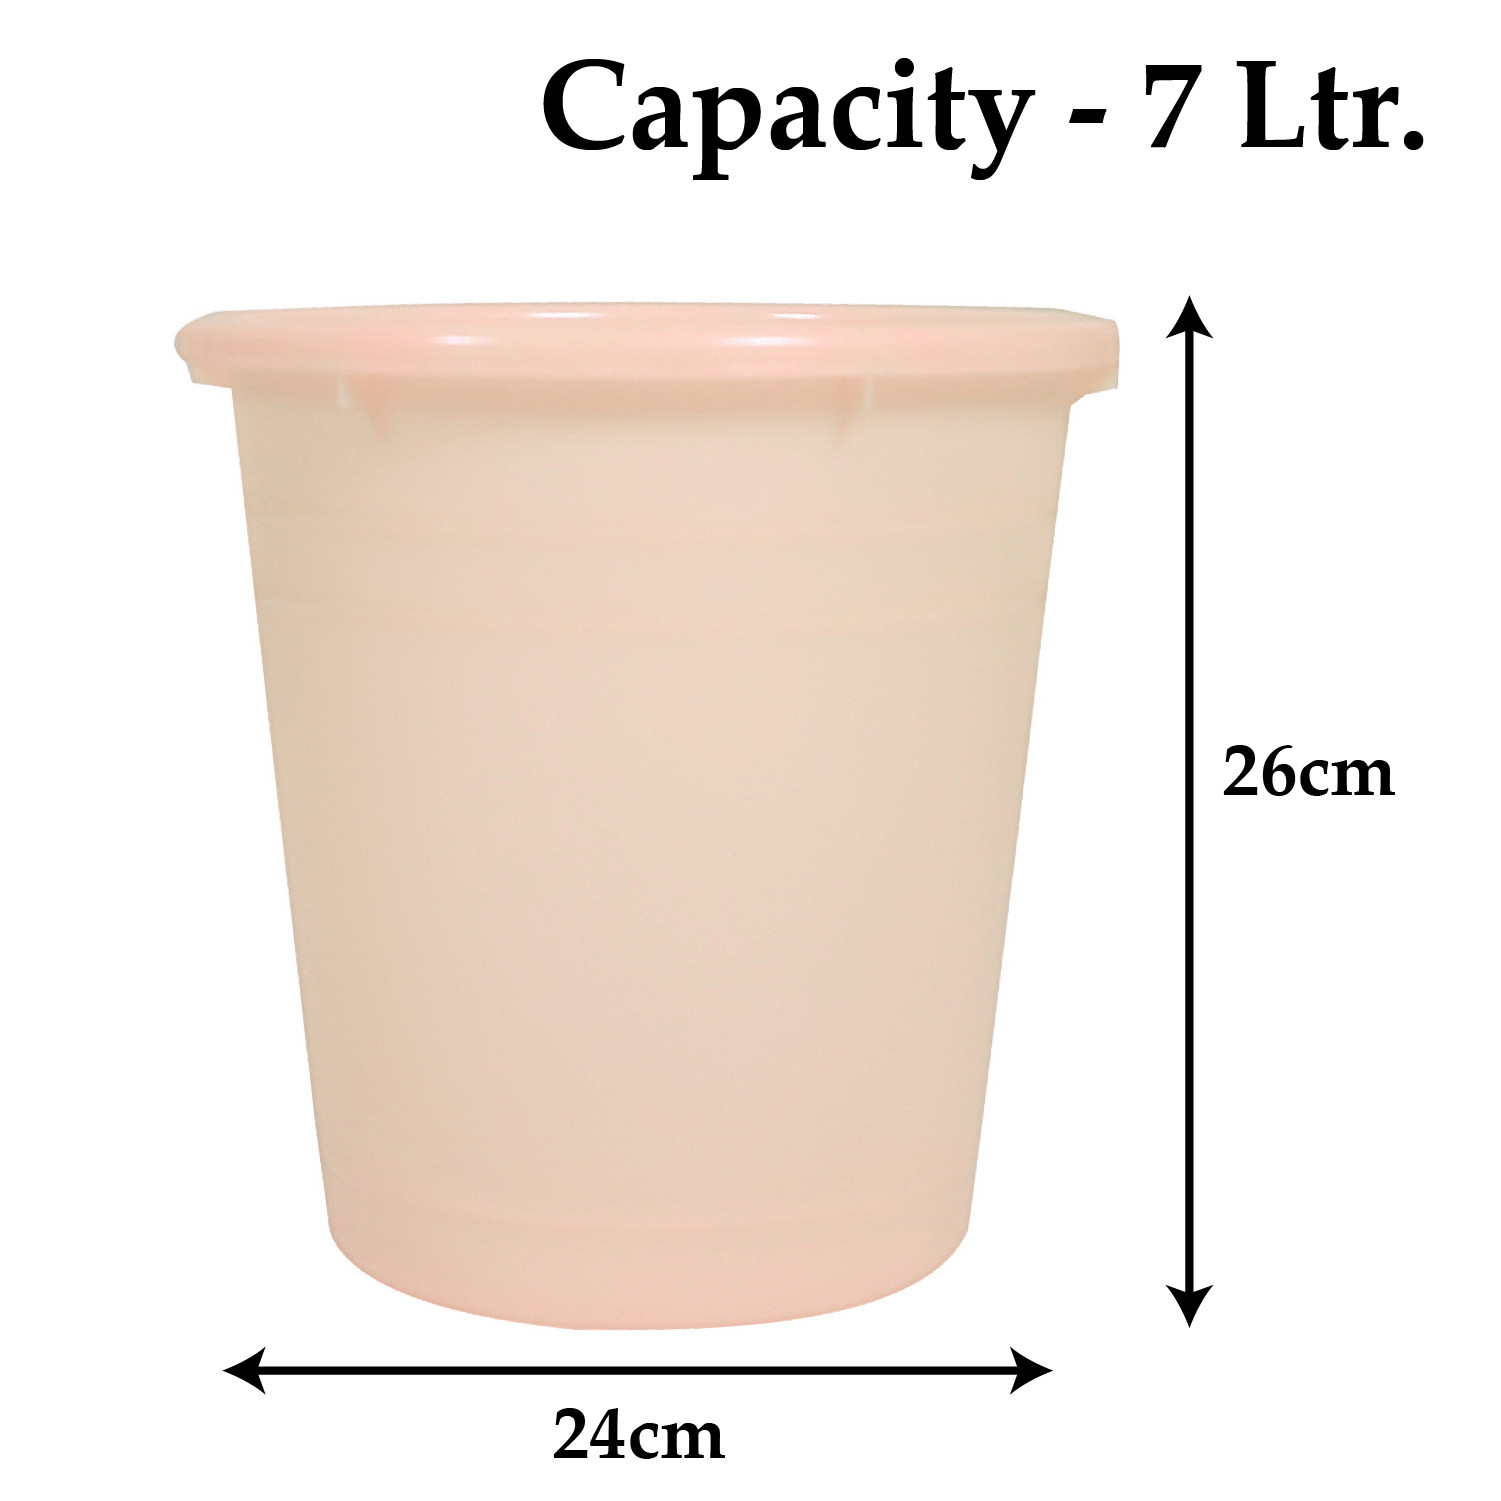 Kuber Industries Plastic Dustbin|Portable Garbage Basket & Round Trash Can for Home,Kitchen,Office,College,7 Ltr.(Cream)